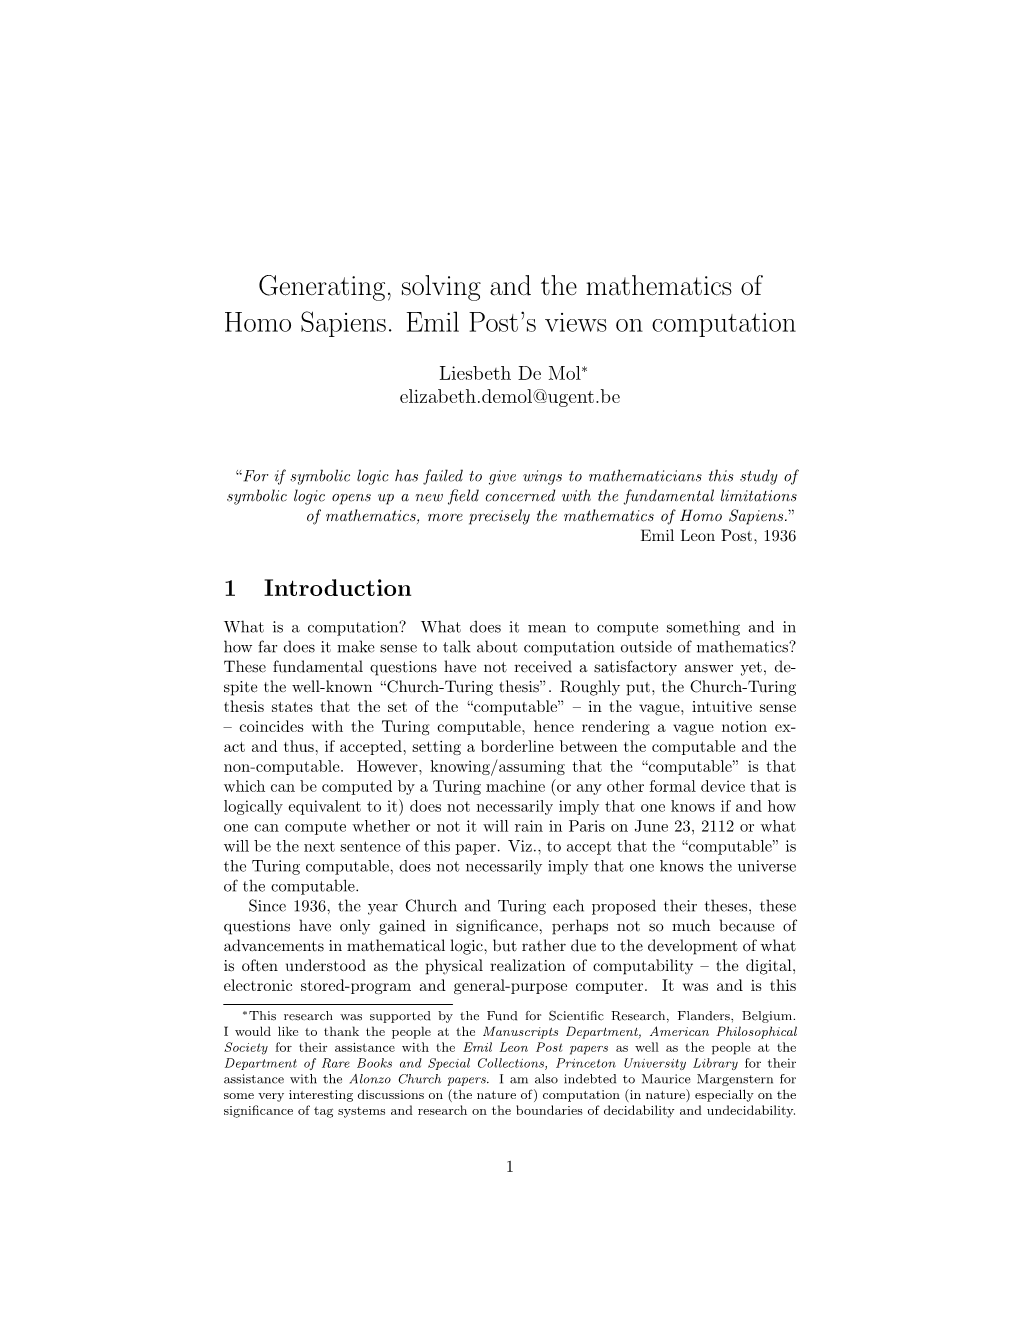 Generating, Solving and the Mathematics of Homo Sapiens. Emil Post's Views on Computation